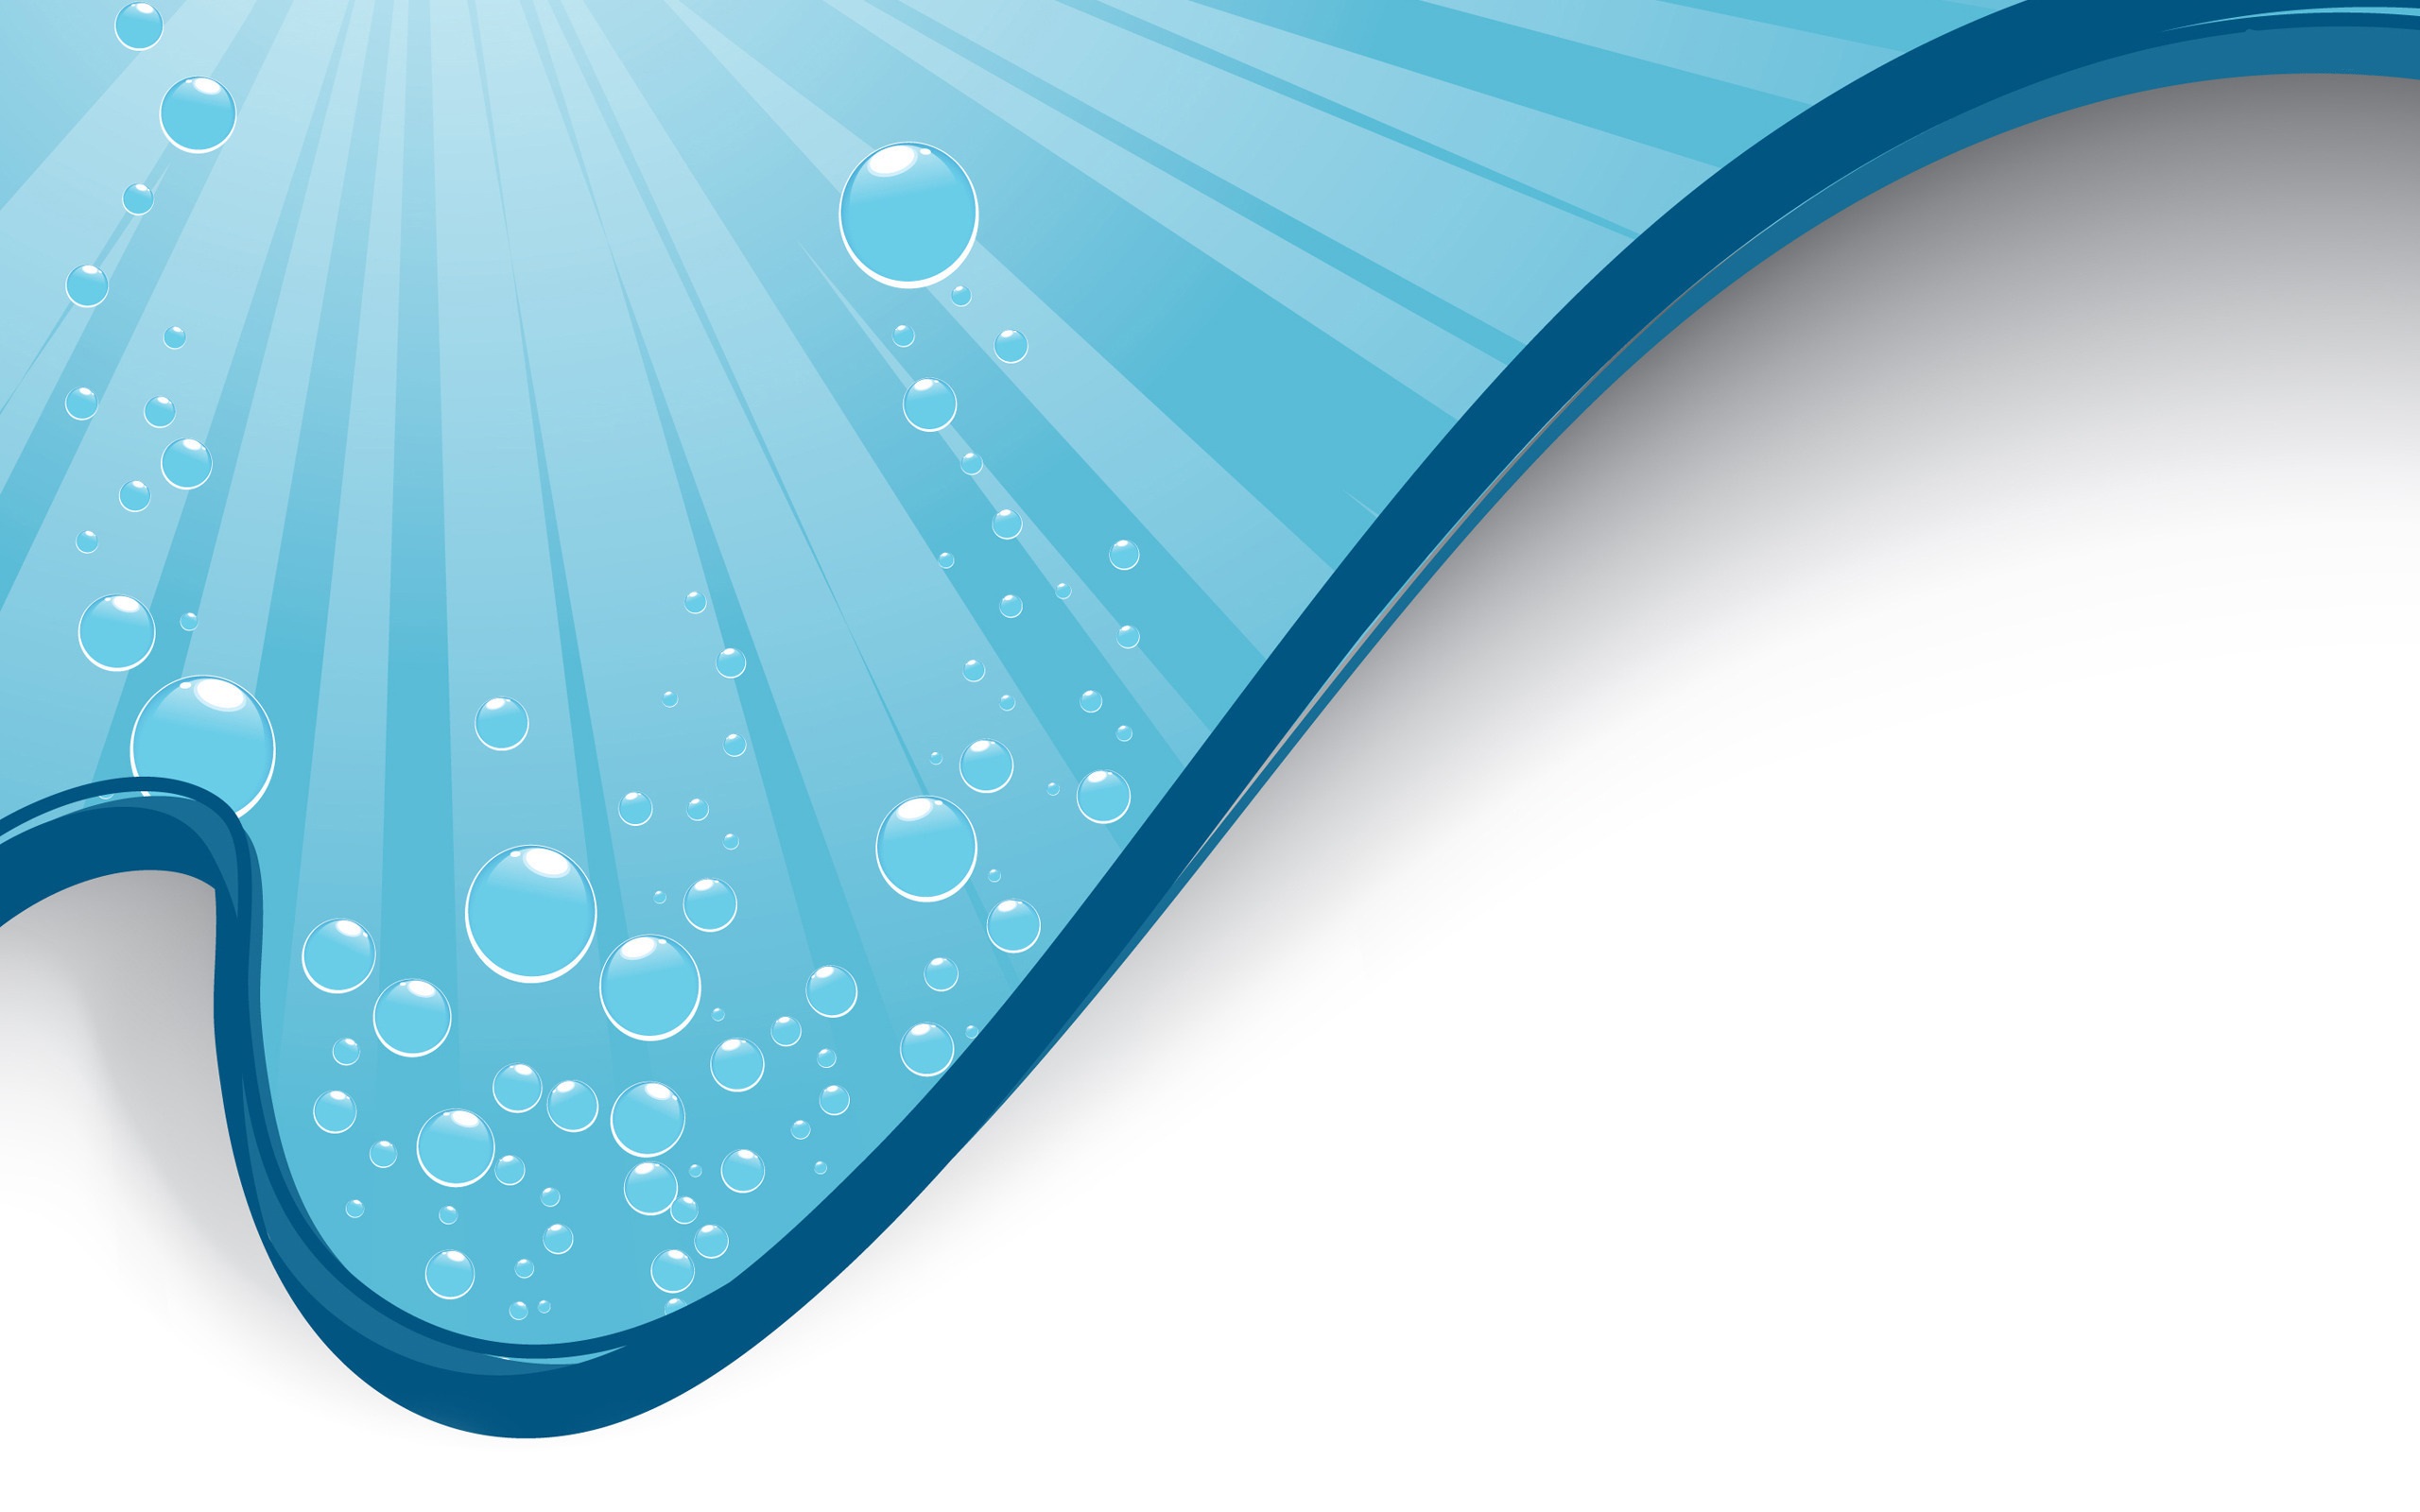 . Hdpng.com Waves Abstract Site Design Header 2560X1600 Hd 637831.jpg - Waves, Transparent background PNG HD thumbnail